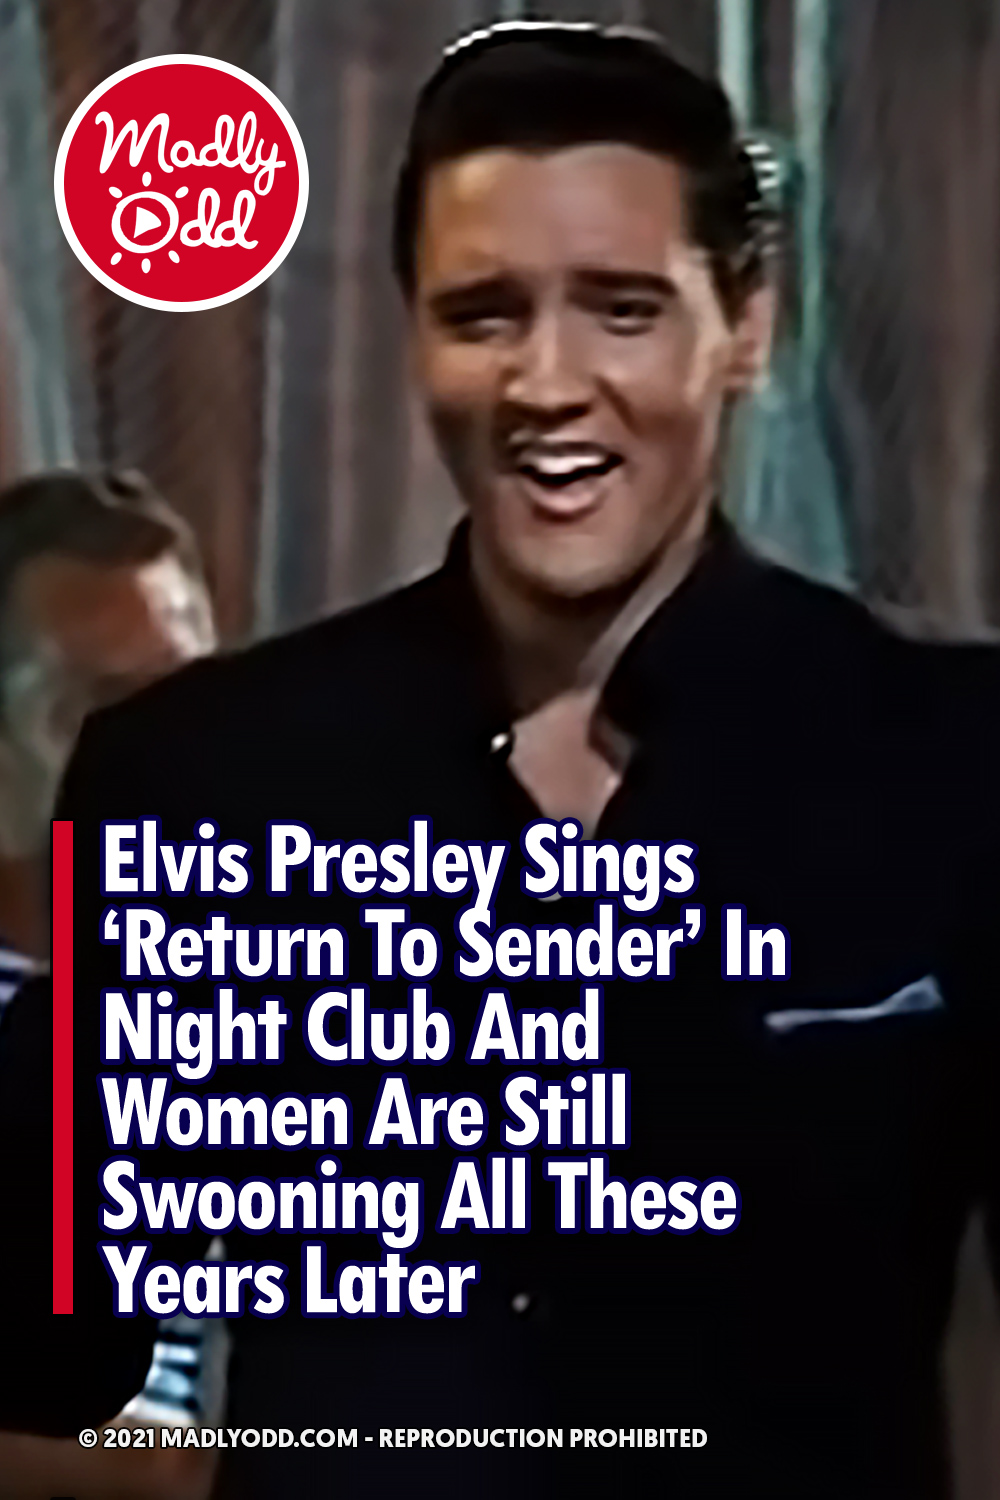 Elvis Presley Sings \'Return To Sender\' In Night Club And Women Are Still Swooning All These Years Later